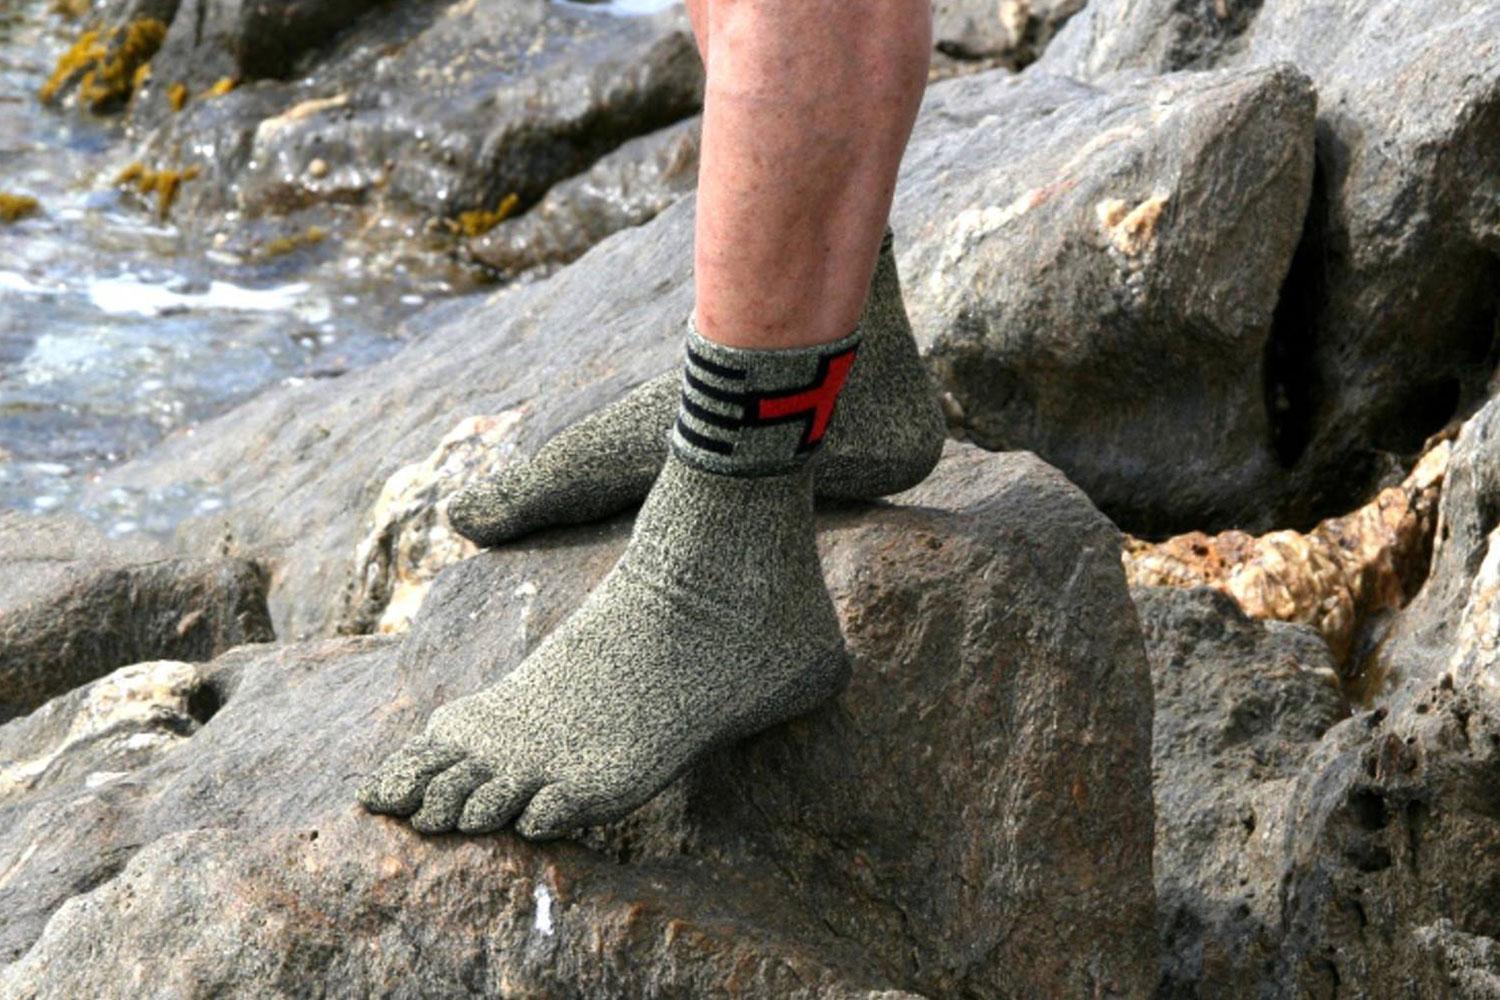 These high-tech socks protect your feet like shoes